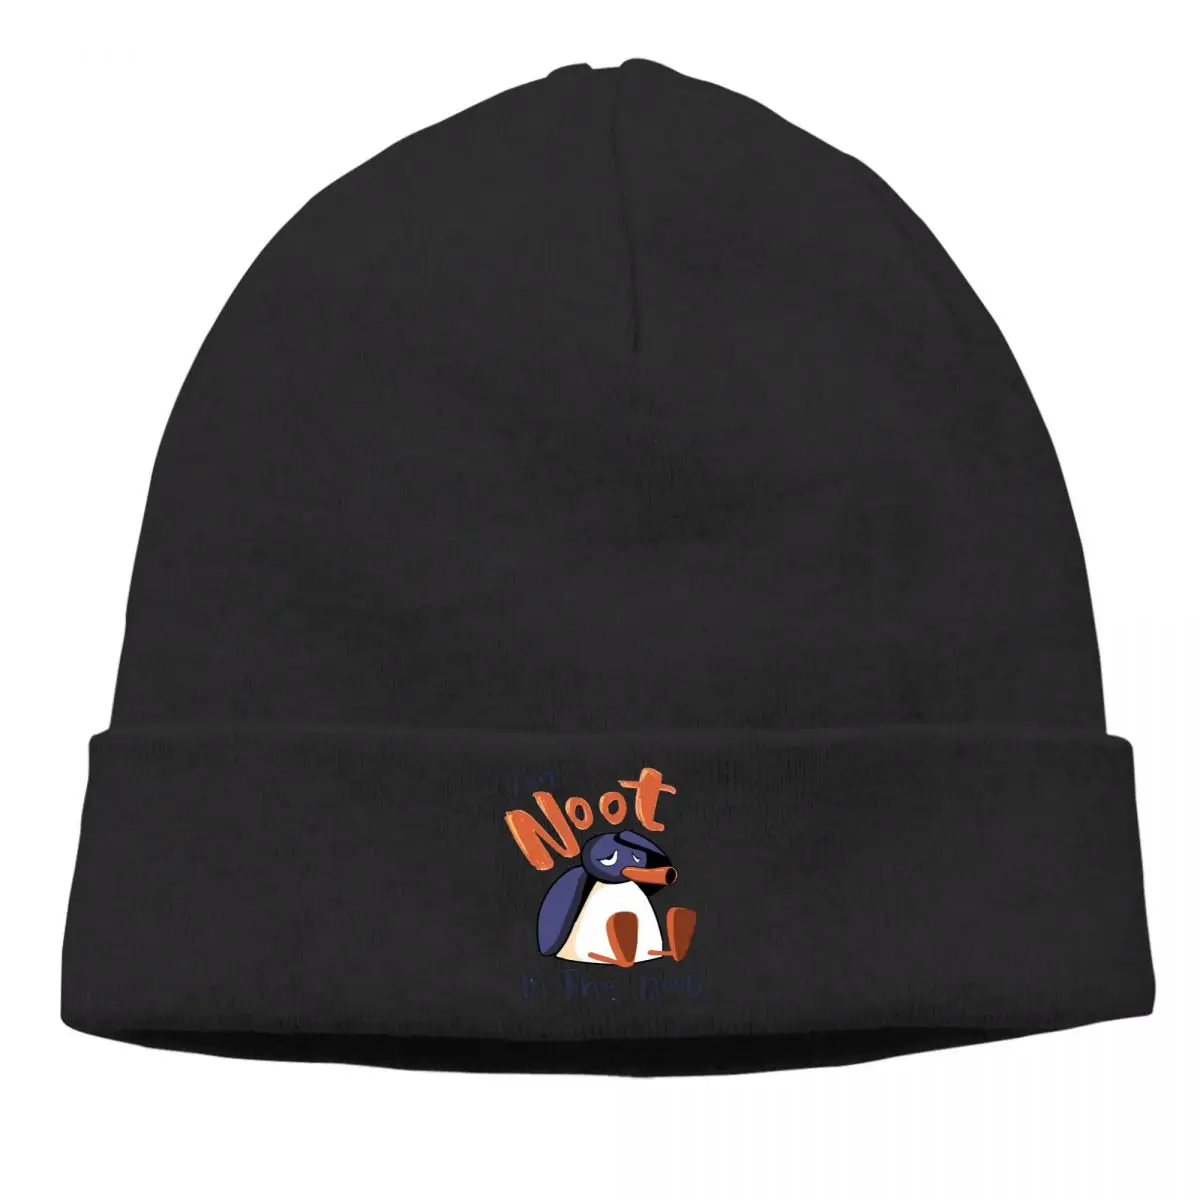 

In The Mood Bonnet Homme Winter Warm Knitted Hat Pingu Pinga Clay Animation Skullies Beanies Caps Style Fabric Hats